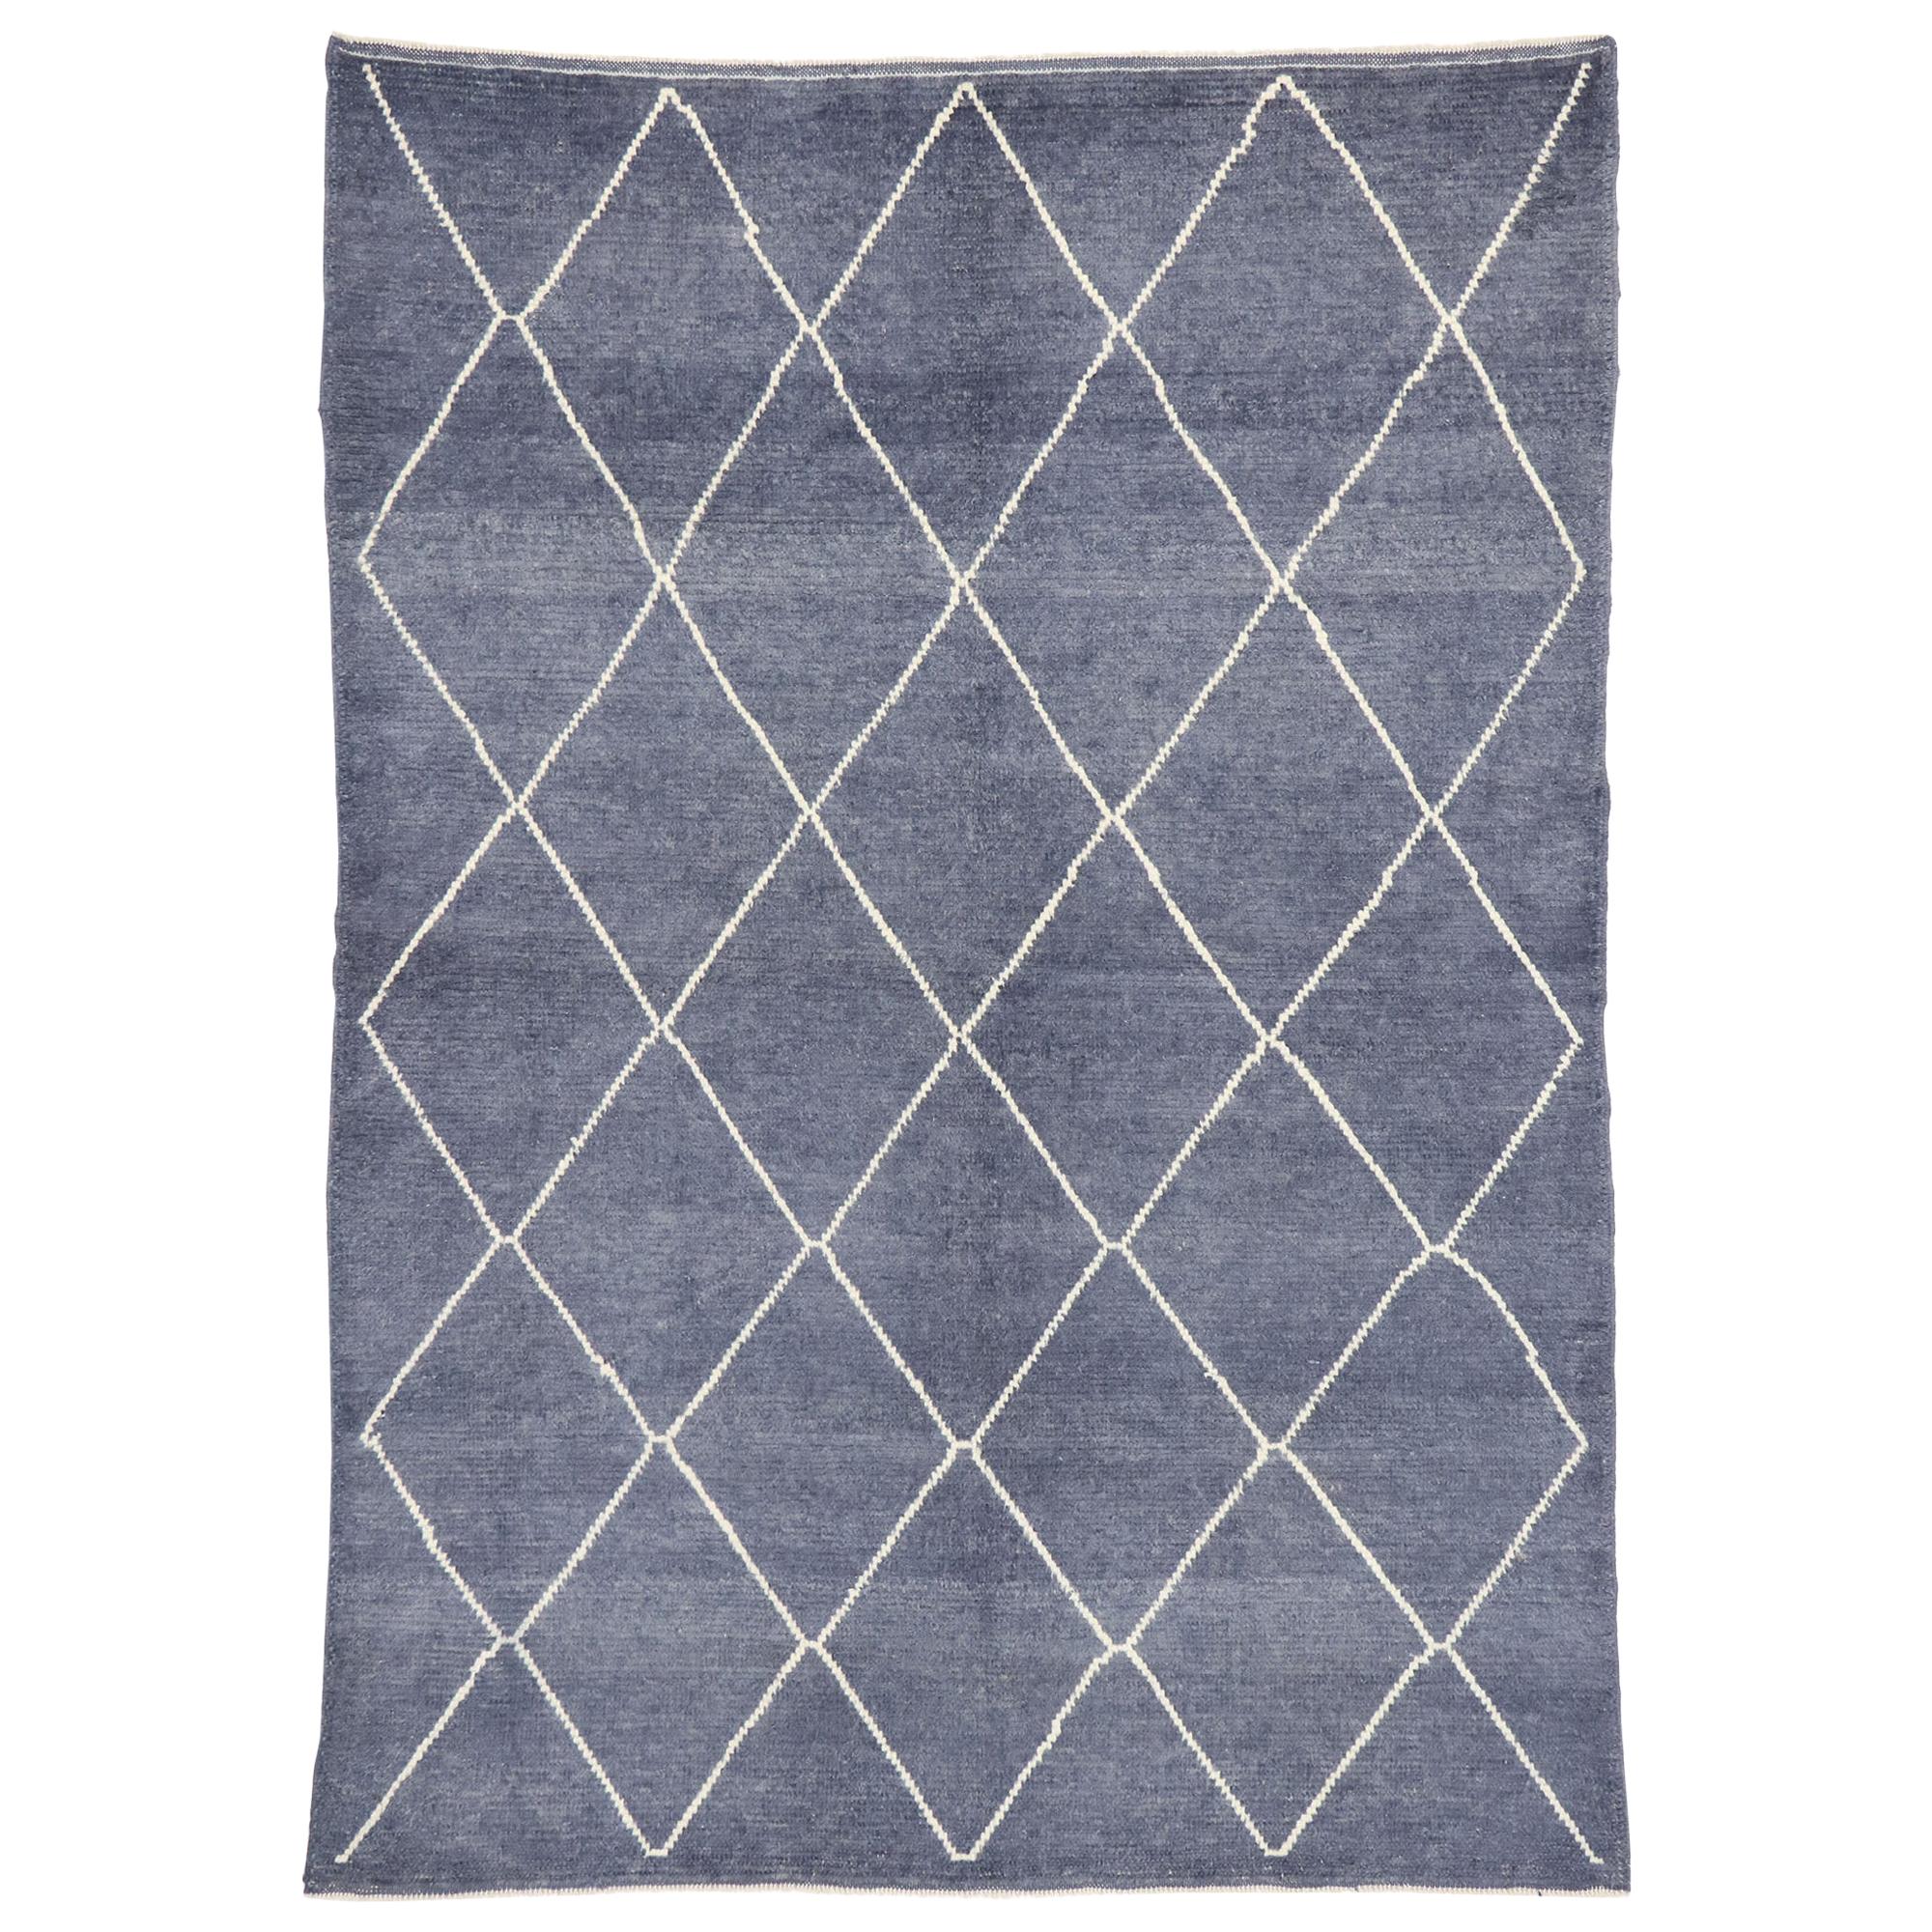 New Contemporary Moroccan Style Rug with Diamond Trellis For Sale